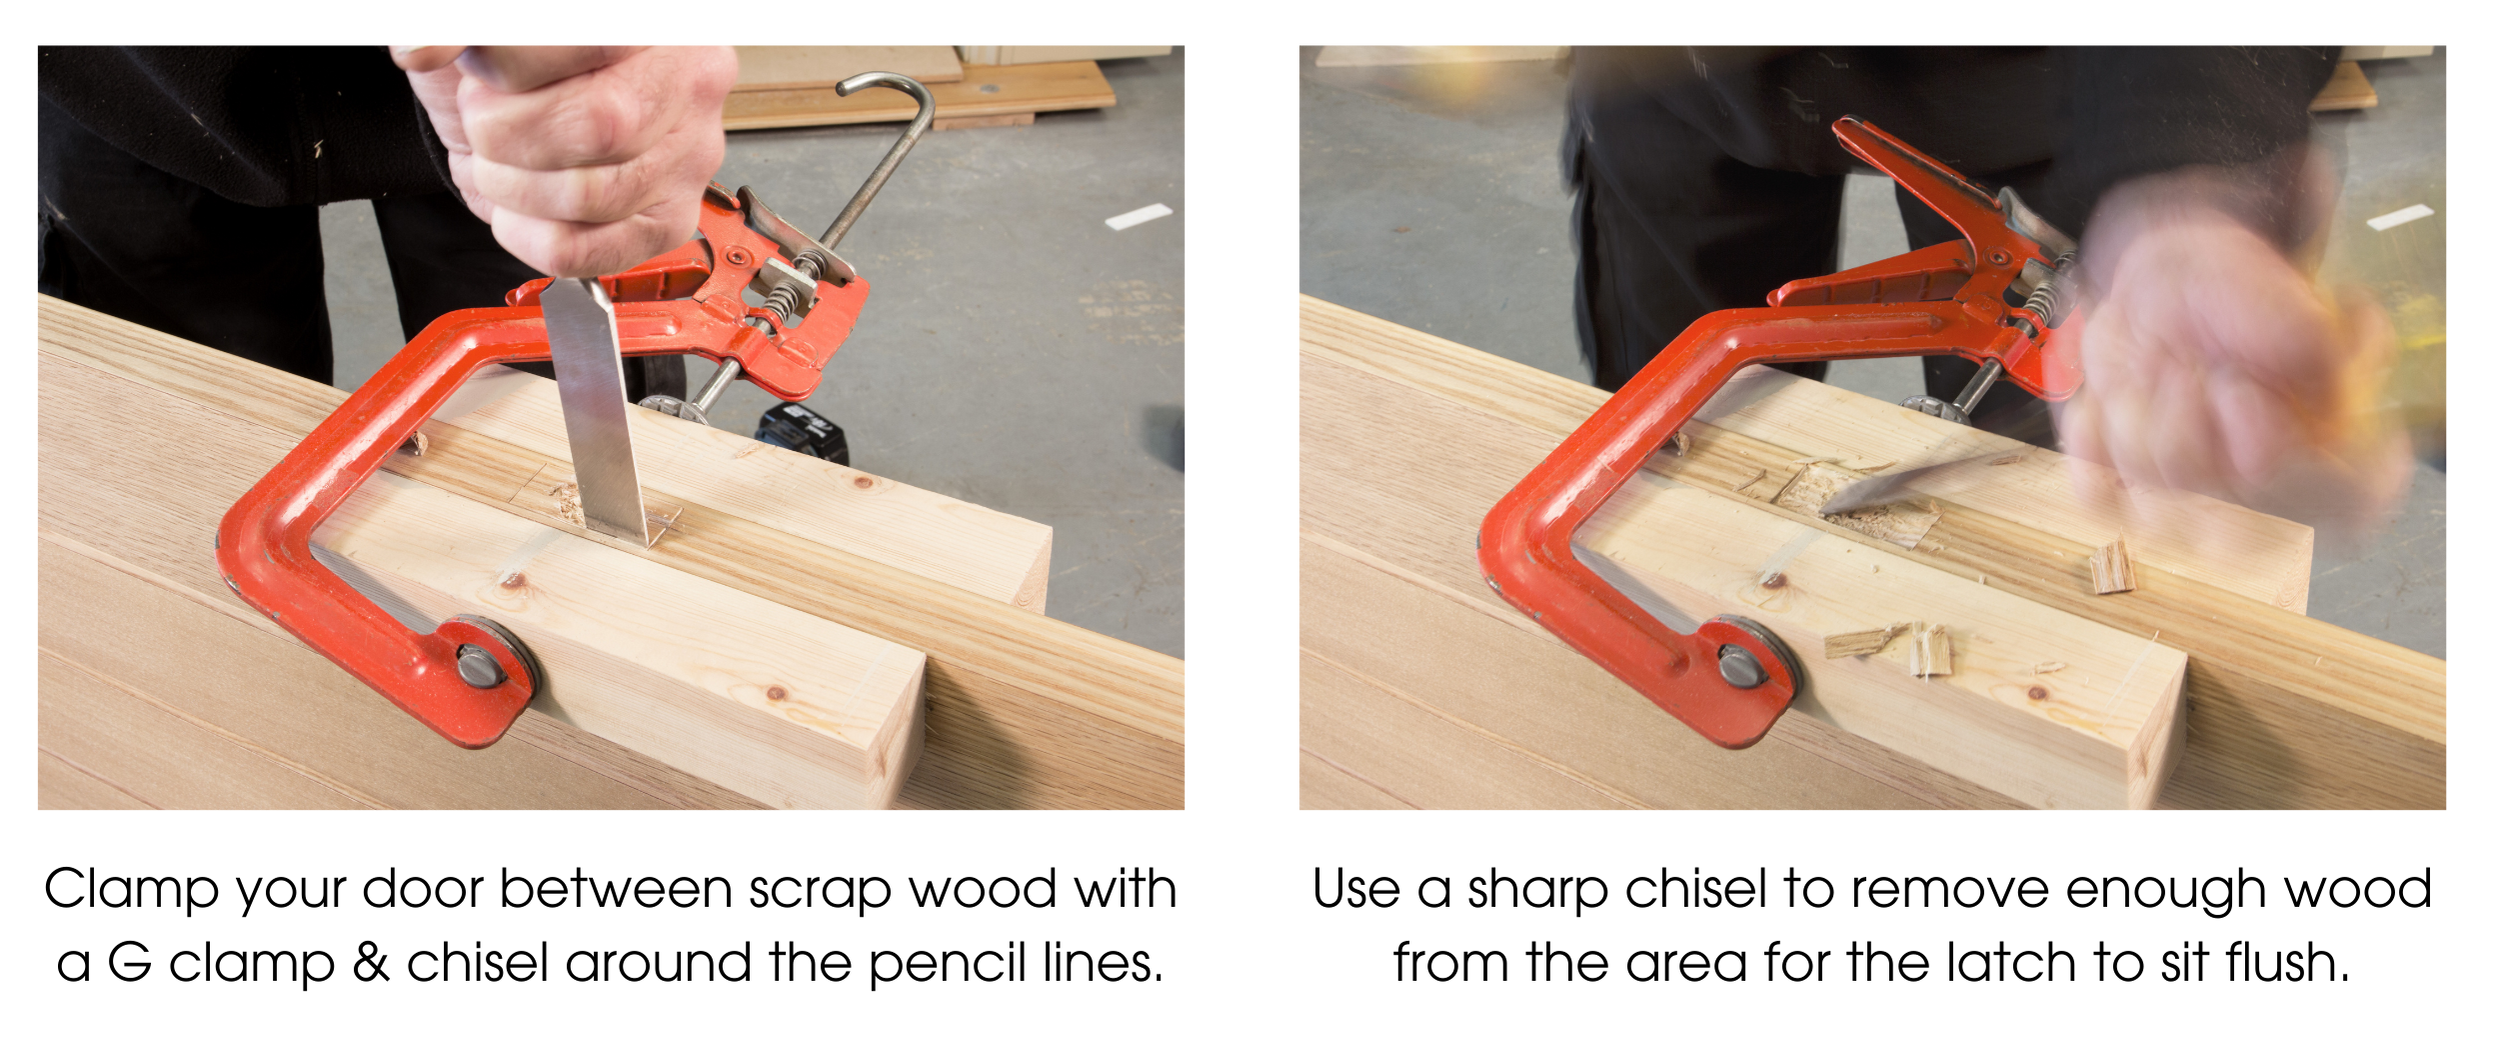 Person using a sharp chisel to cut out a space in the edge of a wooden door clamped in a G clamp.